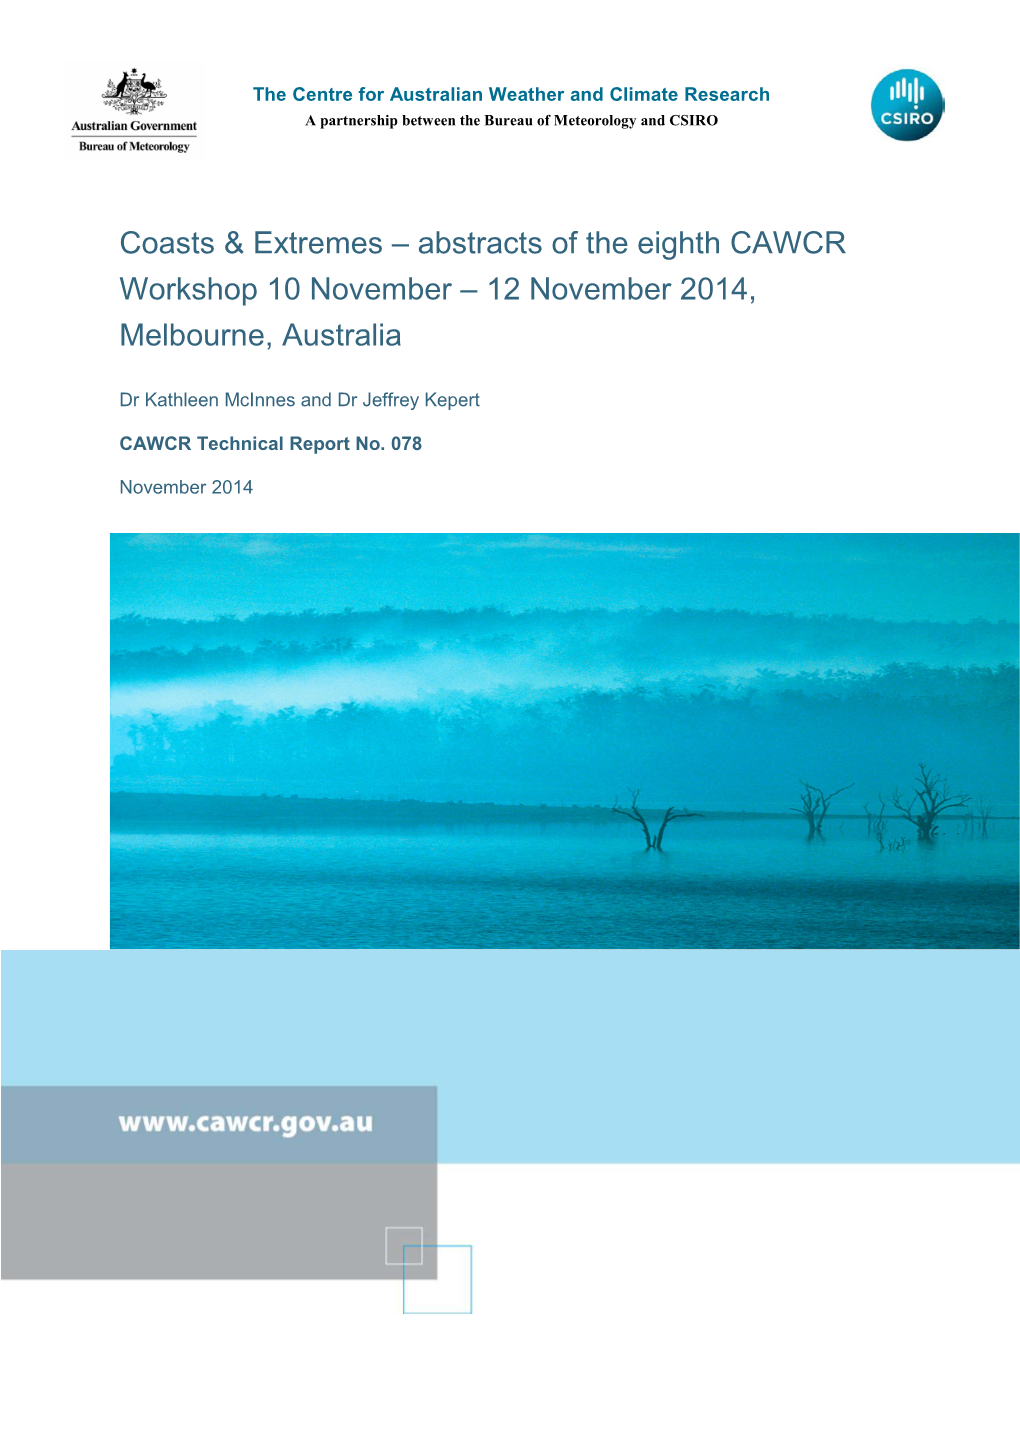 Abstracts of the Eighth CAWCR Workshop 10 November – 12 November 2014, Melbourne, Australia